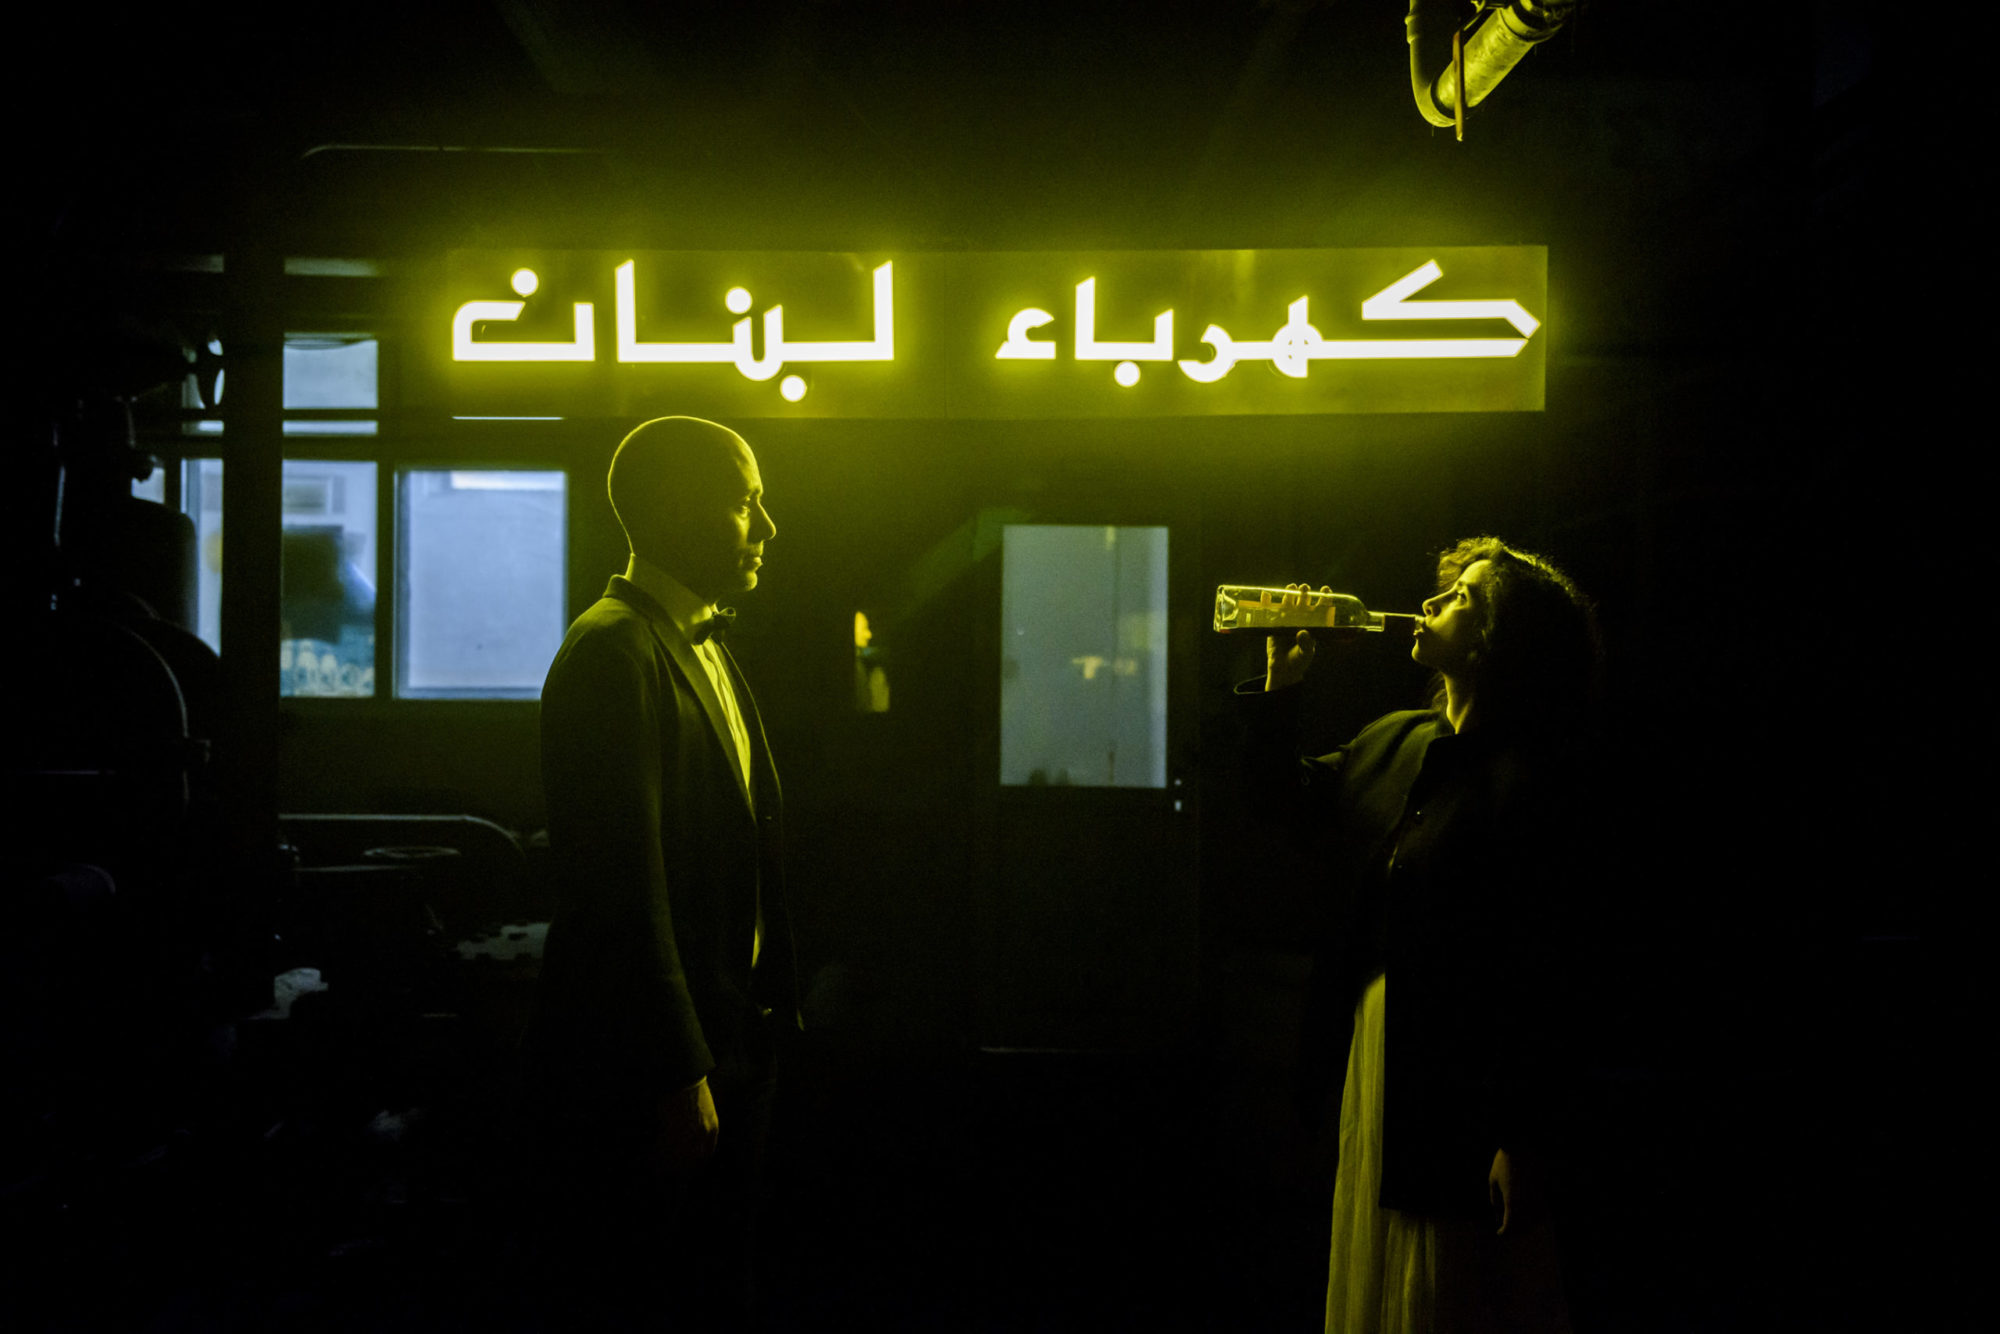 a man and a woman face each other, back-lit by the green glow of a neon sign; the man, dressed in a tuxedo, watches as the woman opposite him takes a swig straight from a bottle